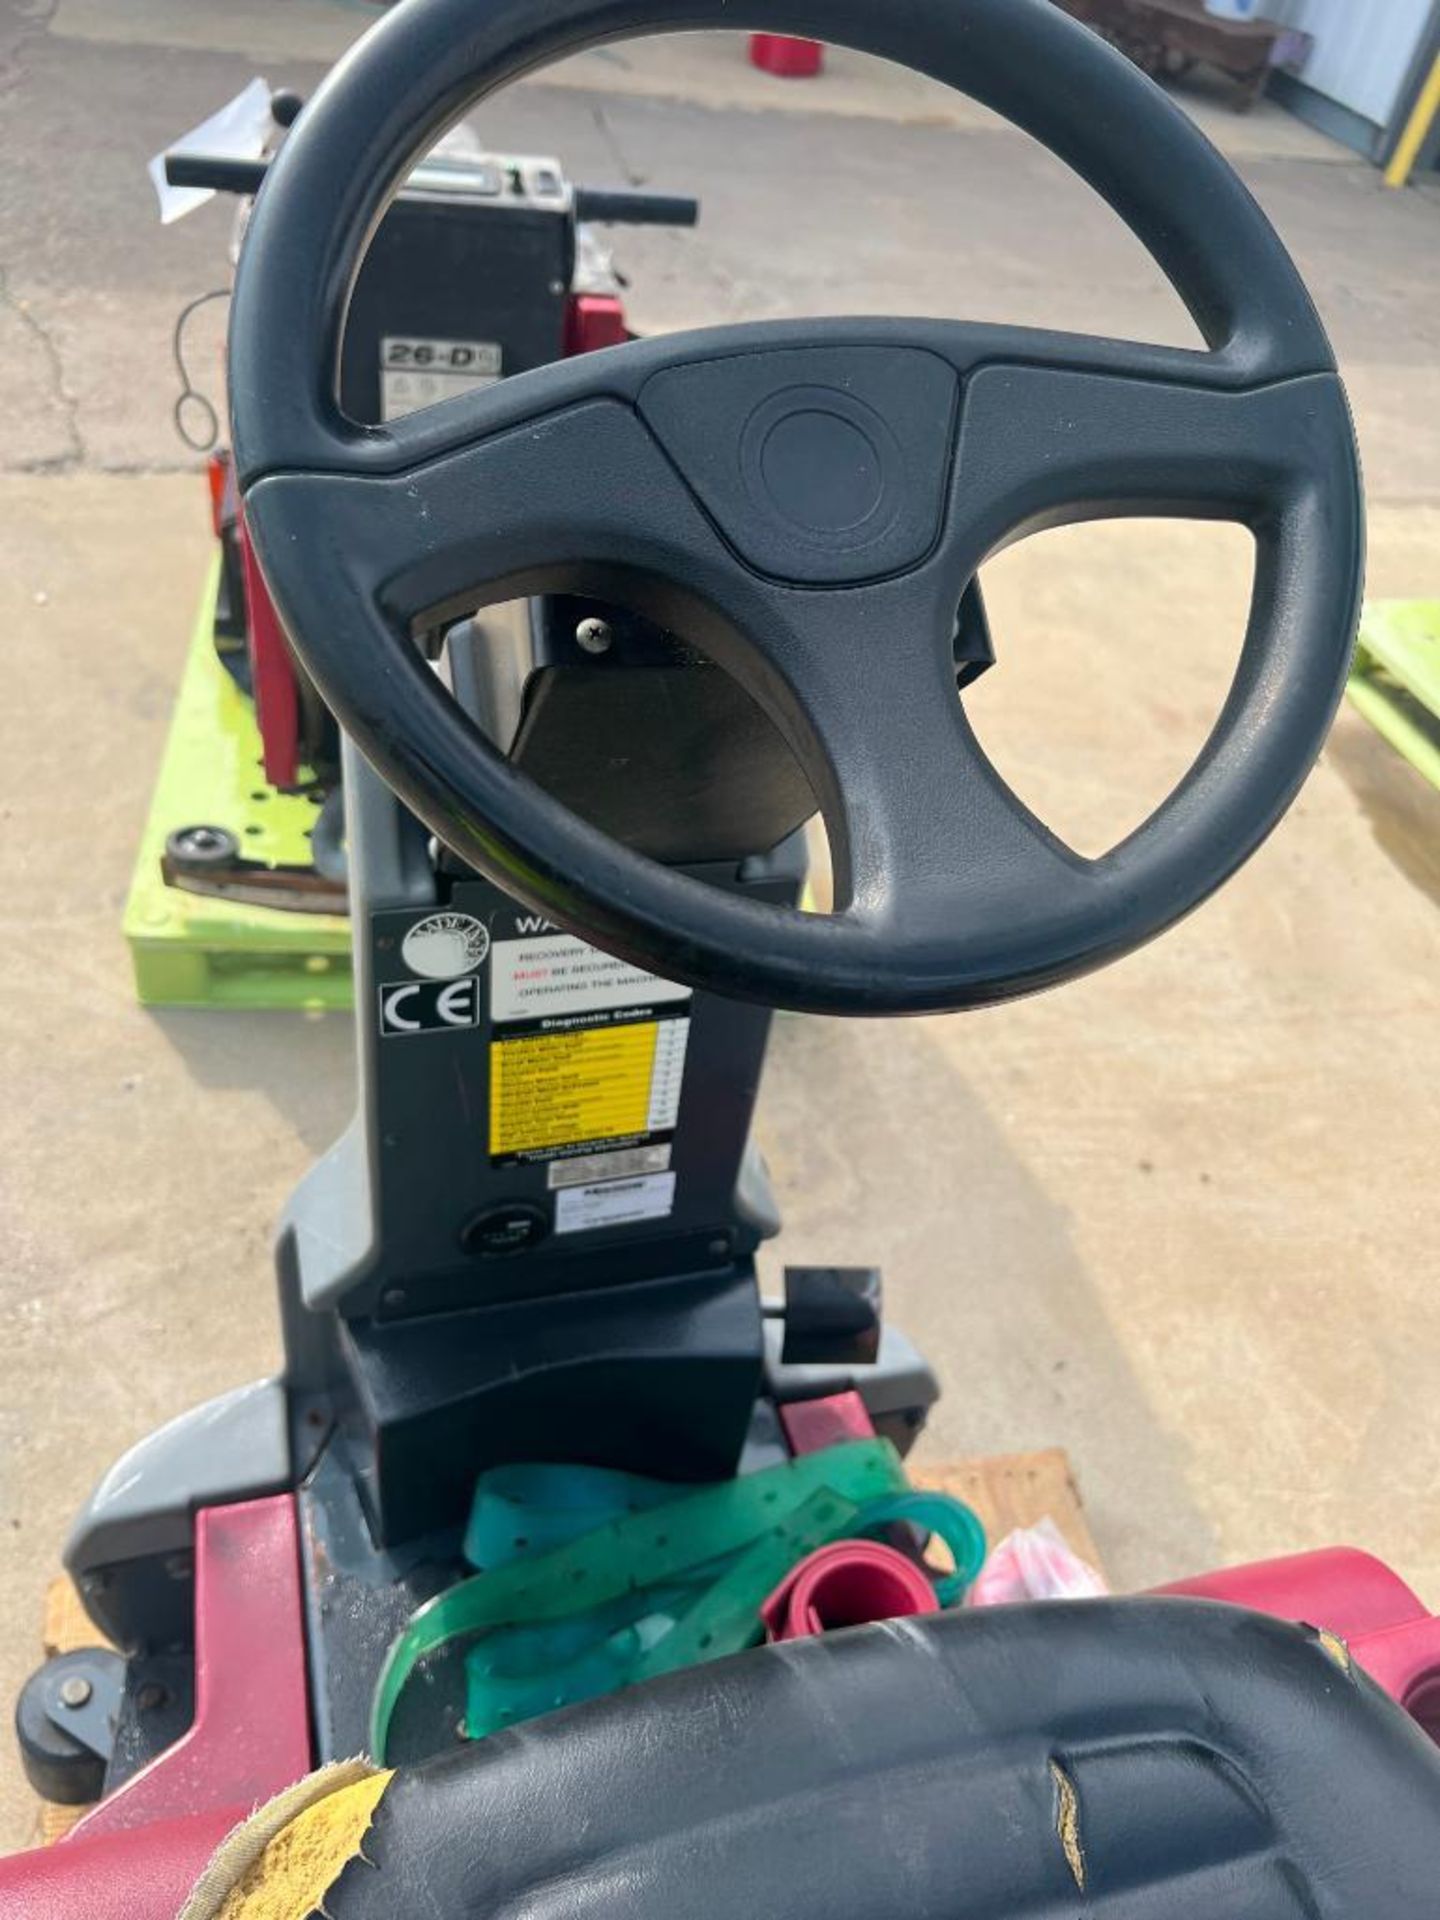 Eride 2832 Rider Floor Scrubber, 8826 Hours, Model ER28D, Serial #13050514, 36 DC Volts. Located in - Image 6 of 15